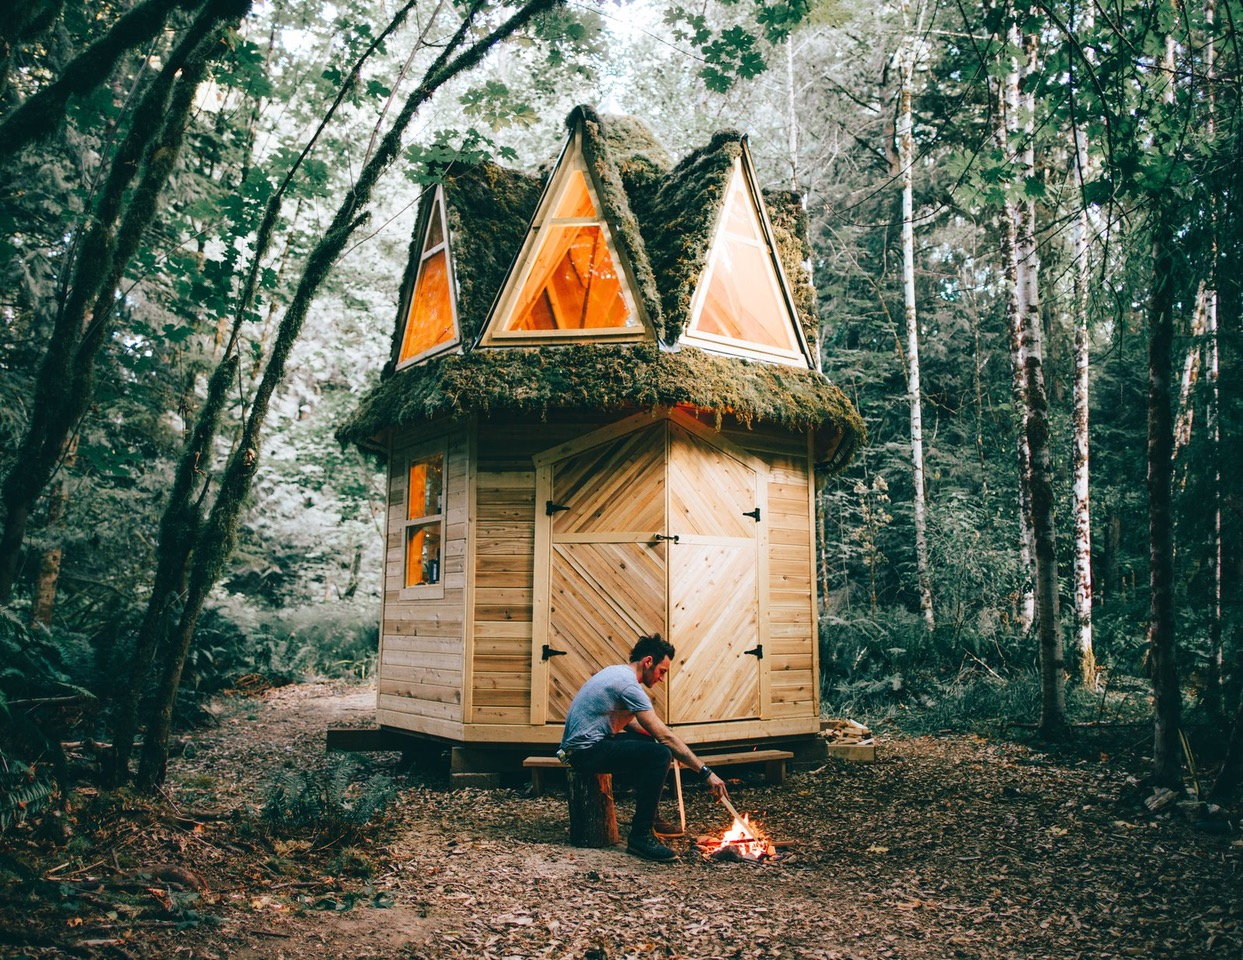 Handmade “Castle Cabin” Brings Fairytale Vibes to the Pacific Northwest